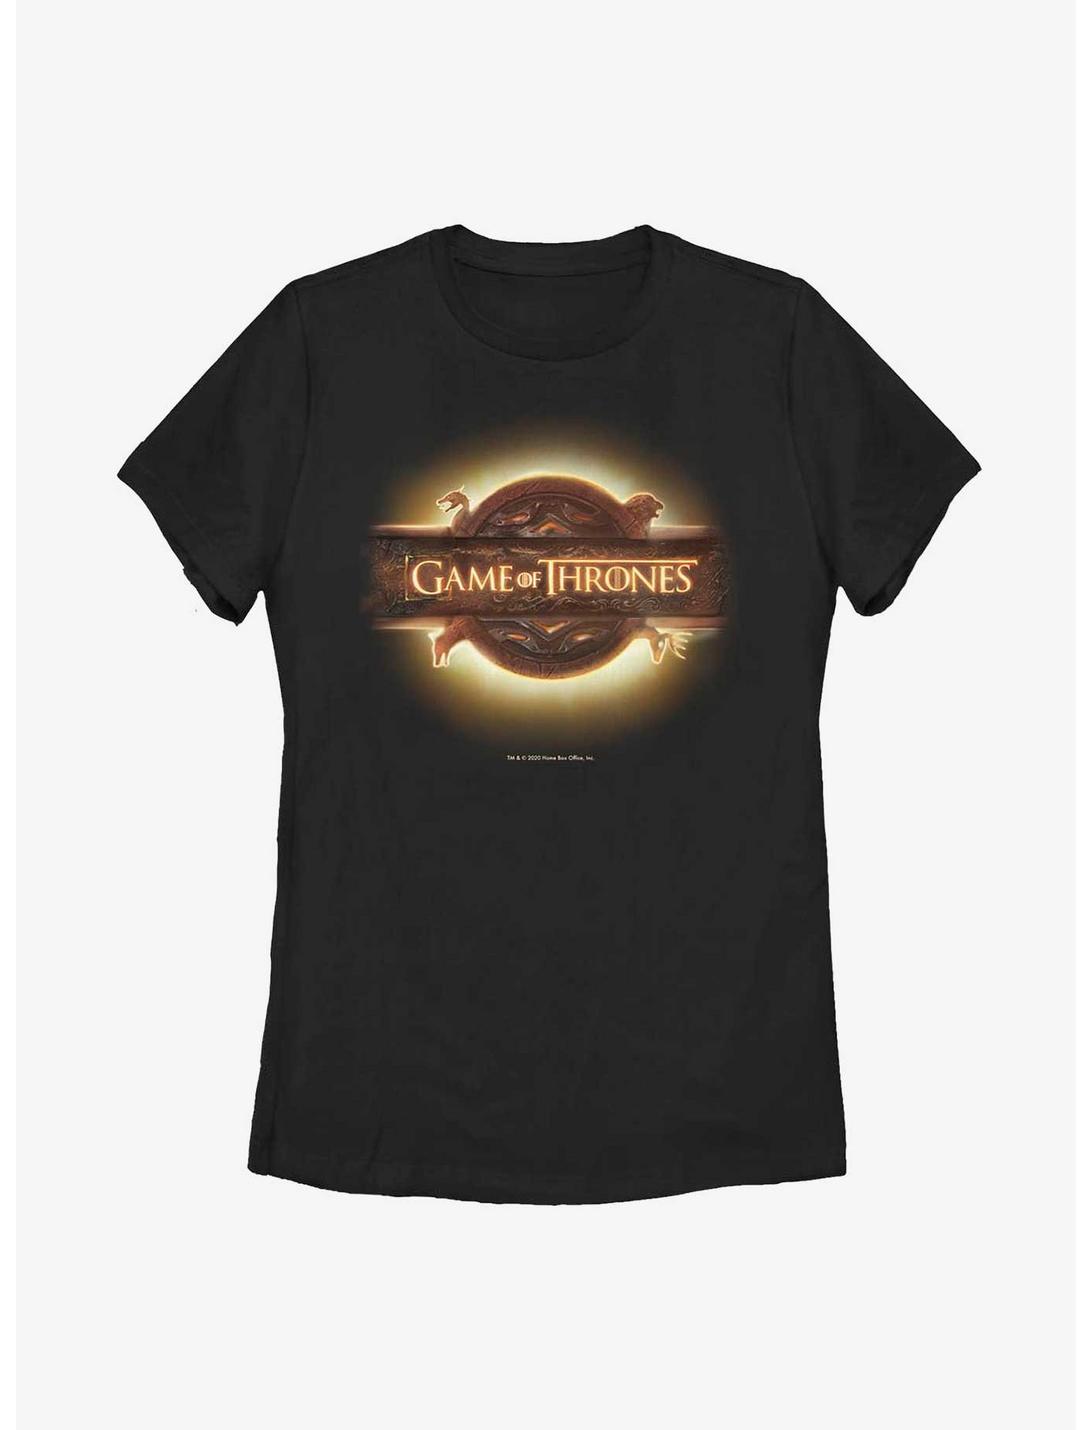 Plus Size Game Of Thrones Opening Lights Womens T-Shirt, BLACK, hi-res